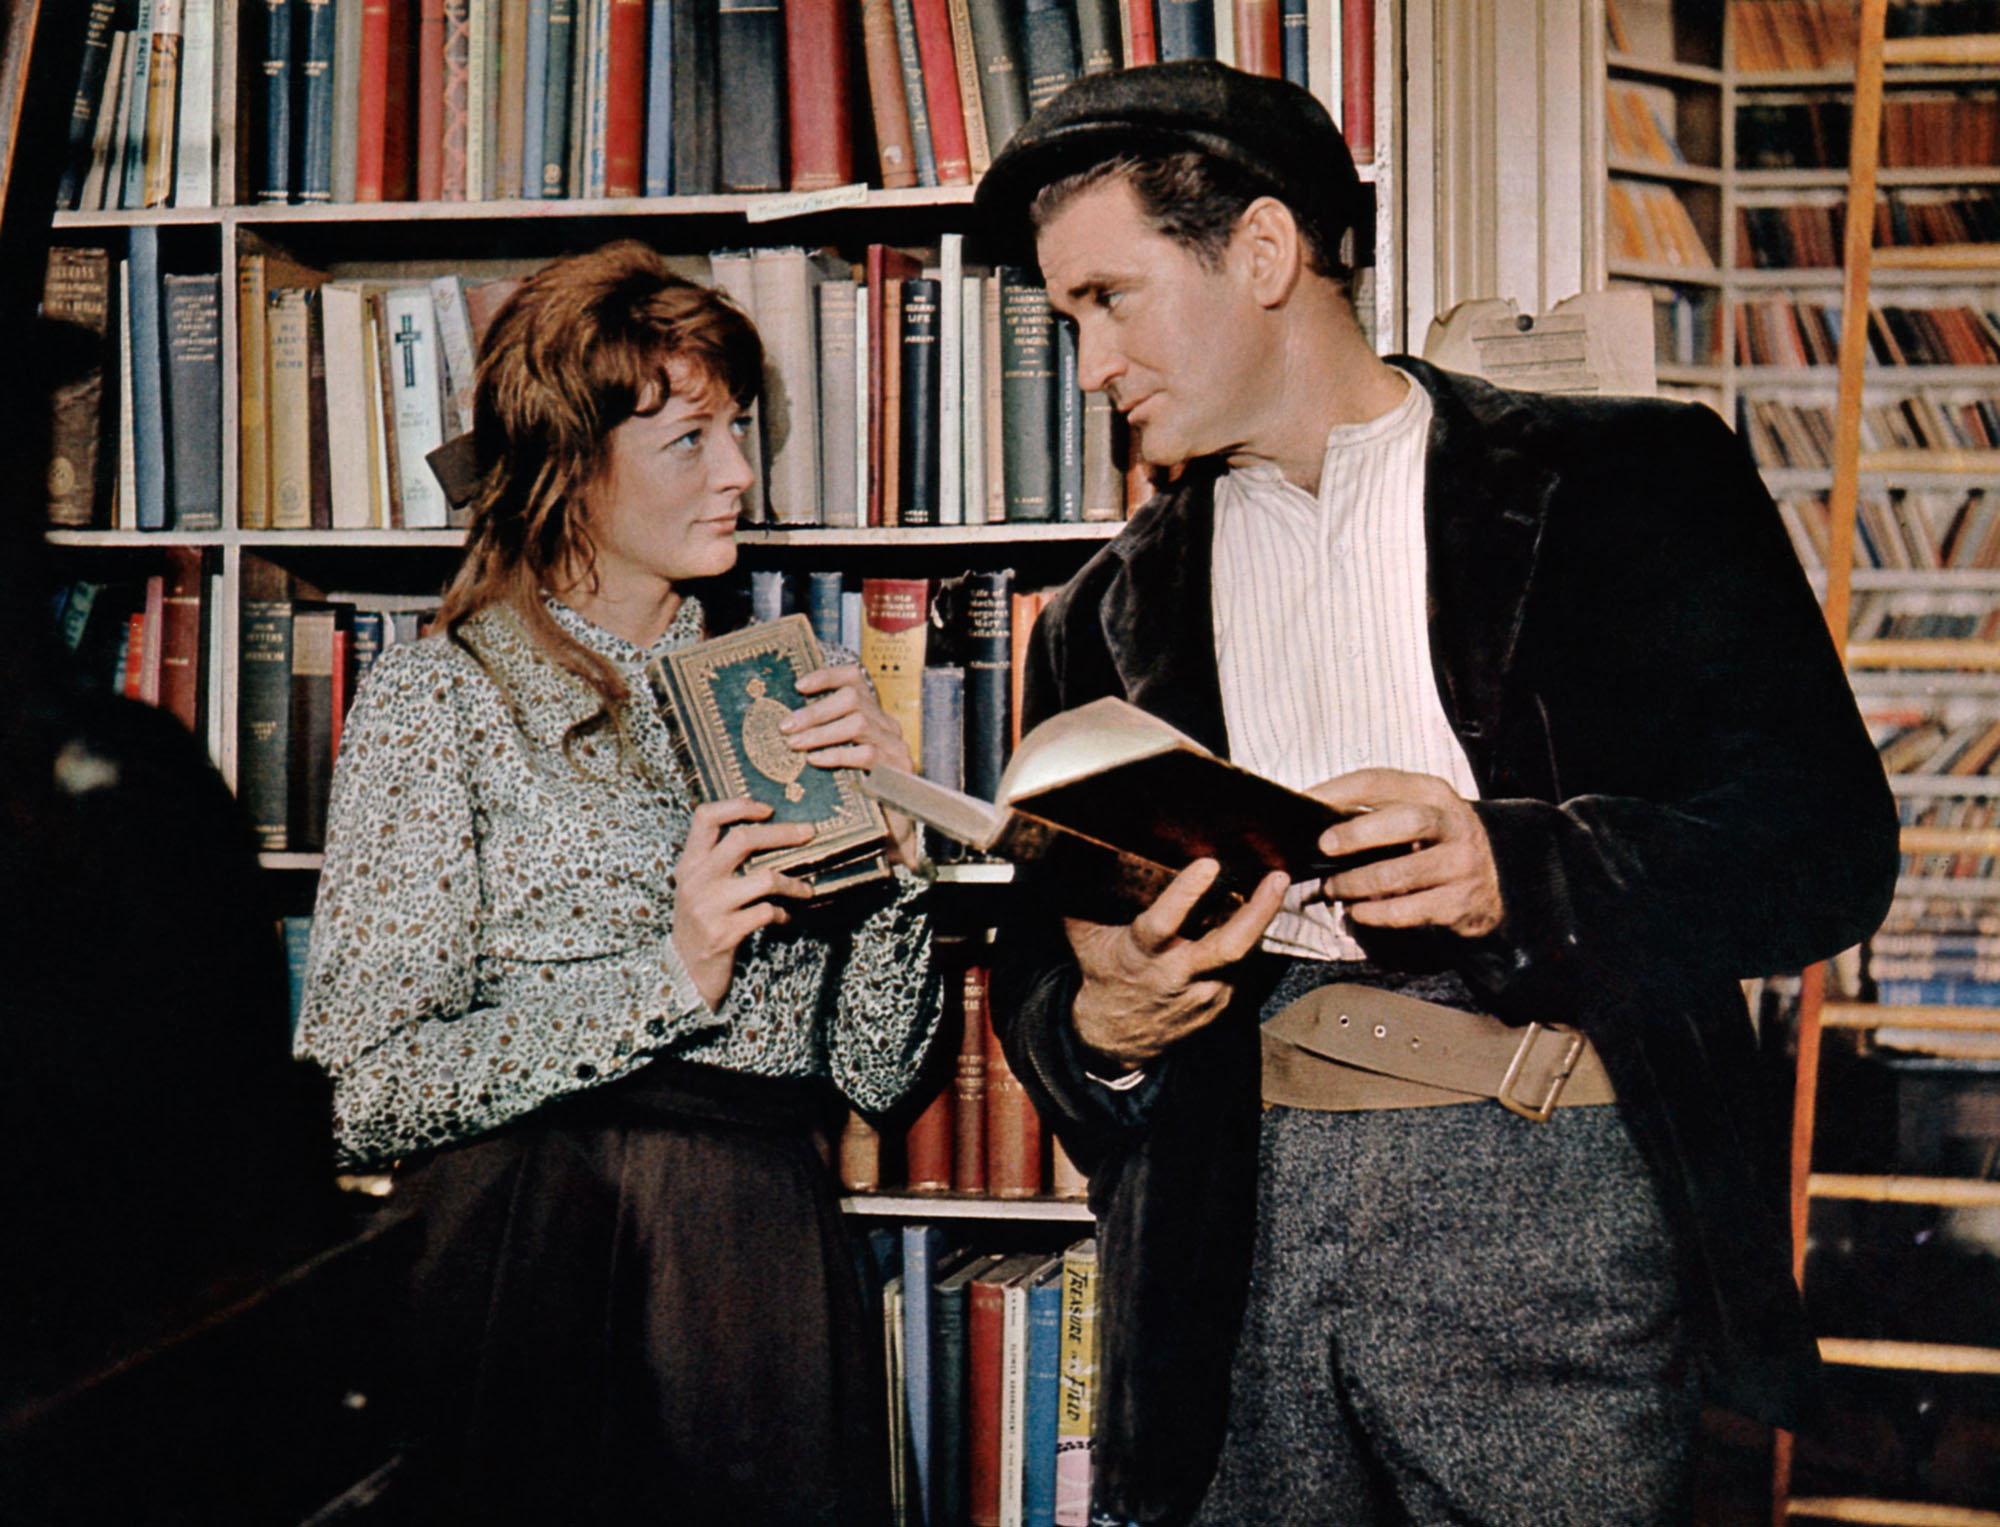 image from the 1965 movie "Young Cassidy." Maggie Smith as Nora on the left, and Rod Taylor as John Cassidy, on the right, are standing in an early 20th century bookshop in Ireland, looking fondly upon one another.